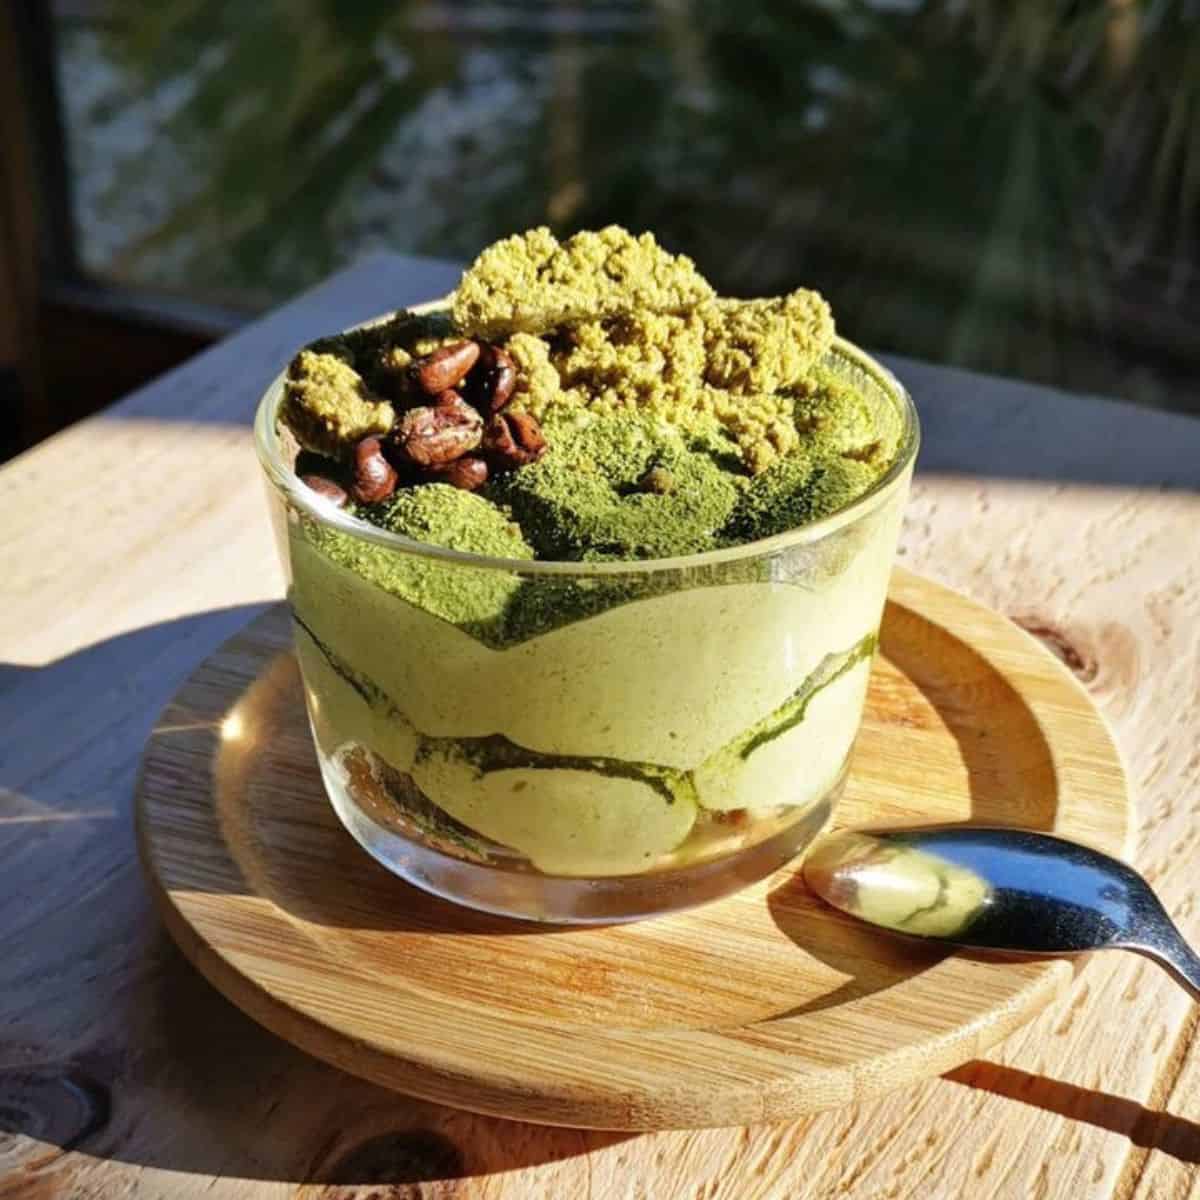 A glass of layered green tea dessert with coffee beans on top.